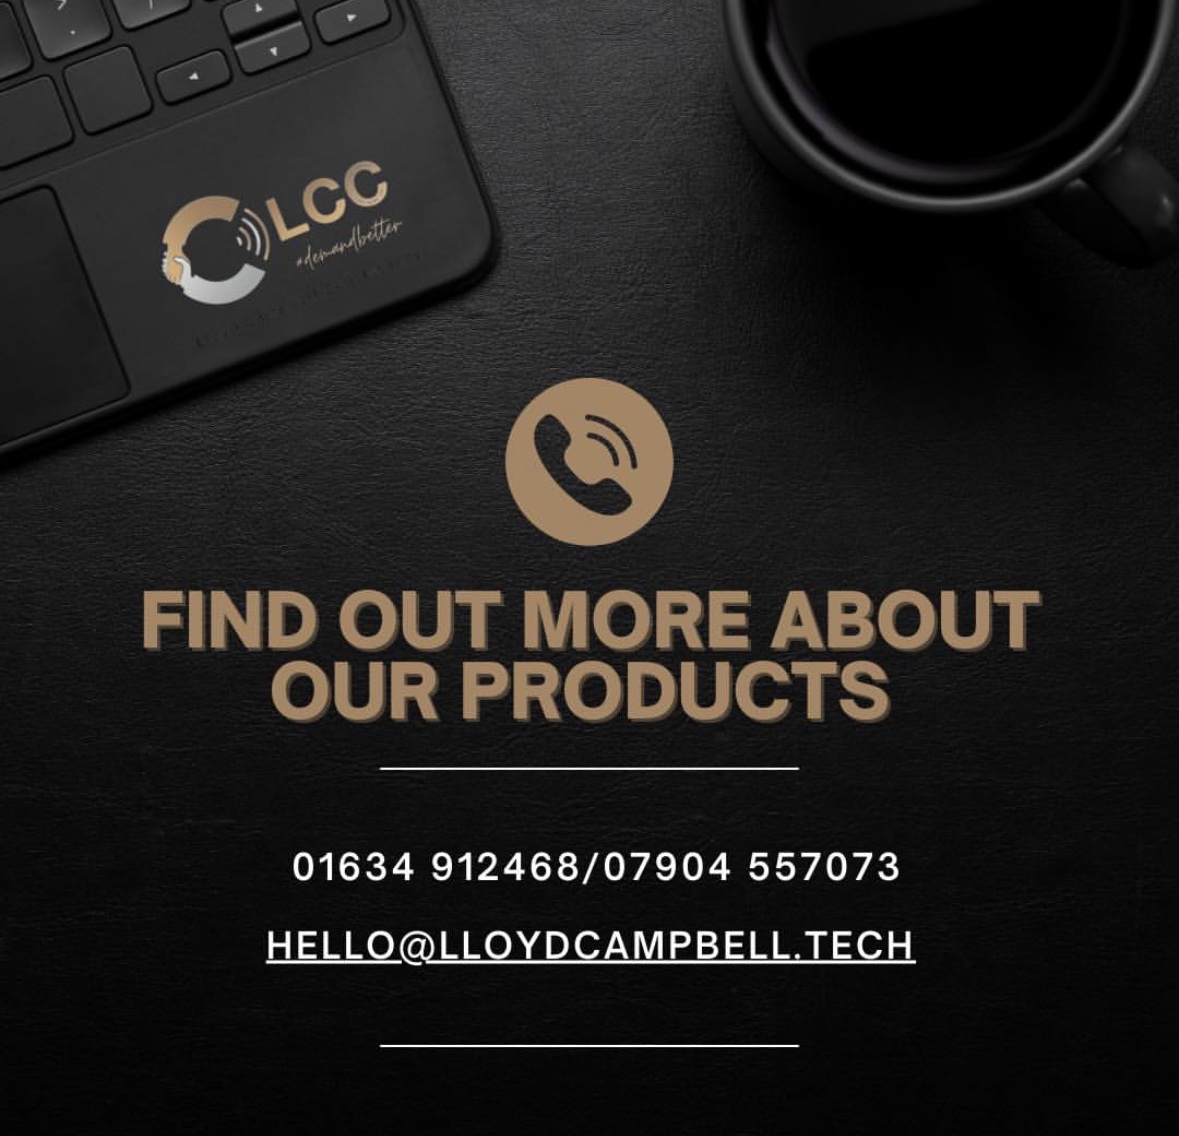 Our products can help make running your business a breeze 🌬️ 

Give us a call to learn more about our latest products and how they can help you! 

#fundingoptions #cashlesspayments #demandbetter #cardmachine #businessgrowth #businessmadesimple #youlend #googlereserve #cashback